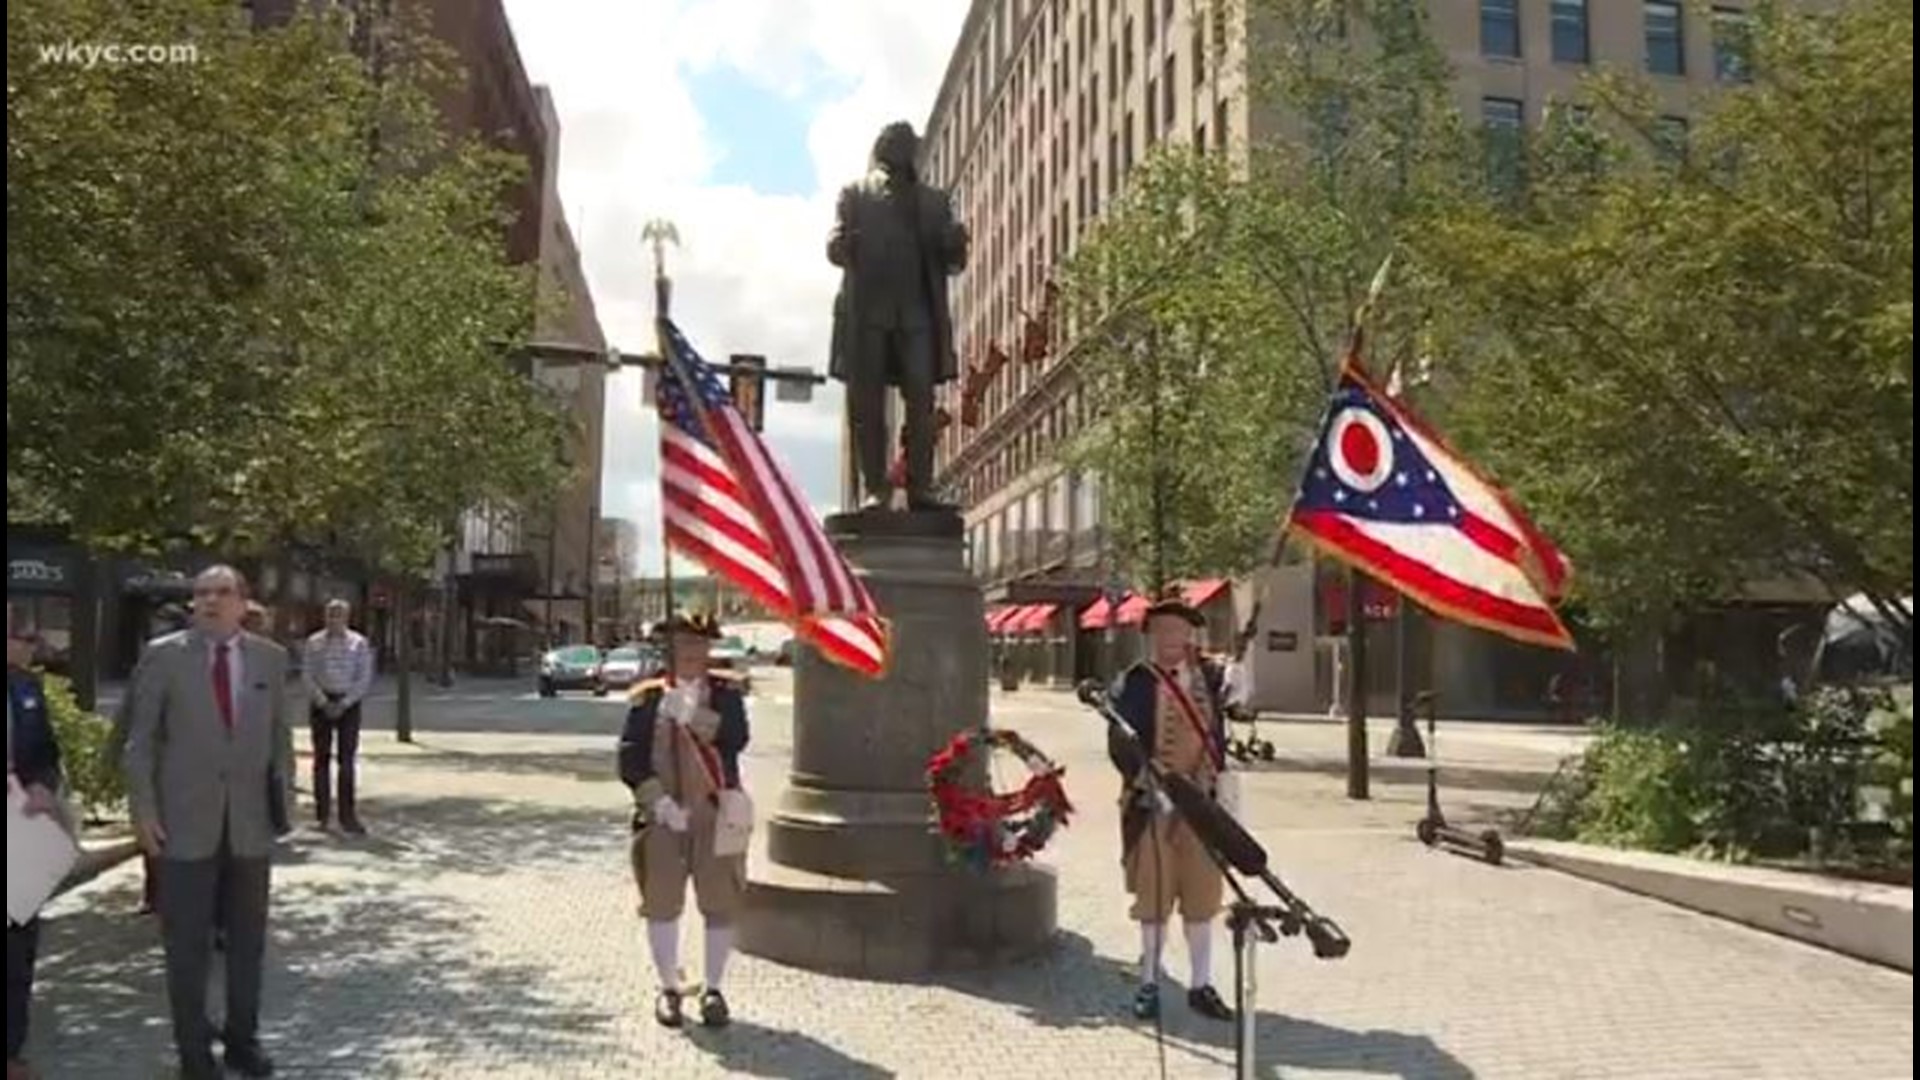 Cleveland's 225th birthday was honored with a special ceremony at the Moses Cleaveland statue in Public Square.